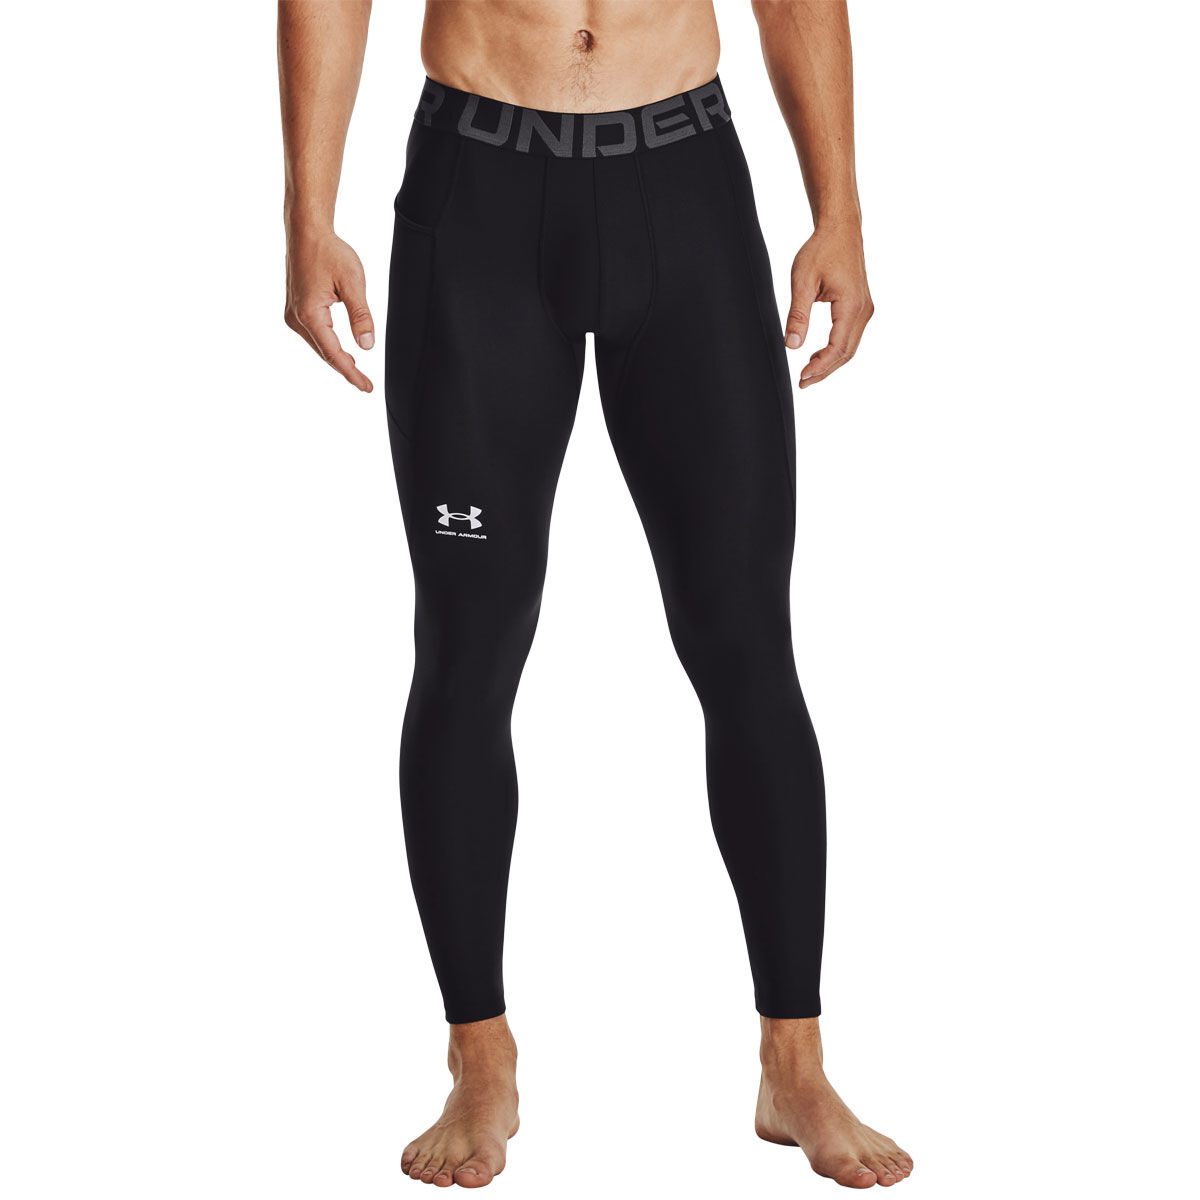 Spalding True To The Game Black & Gray Leggings Athletic Workout